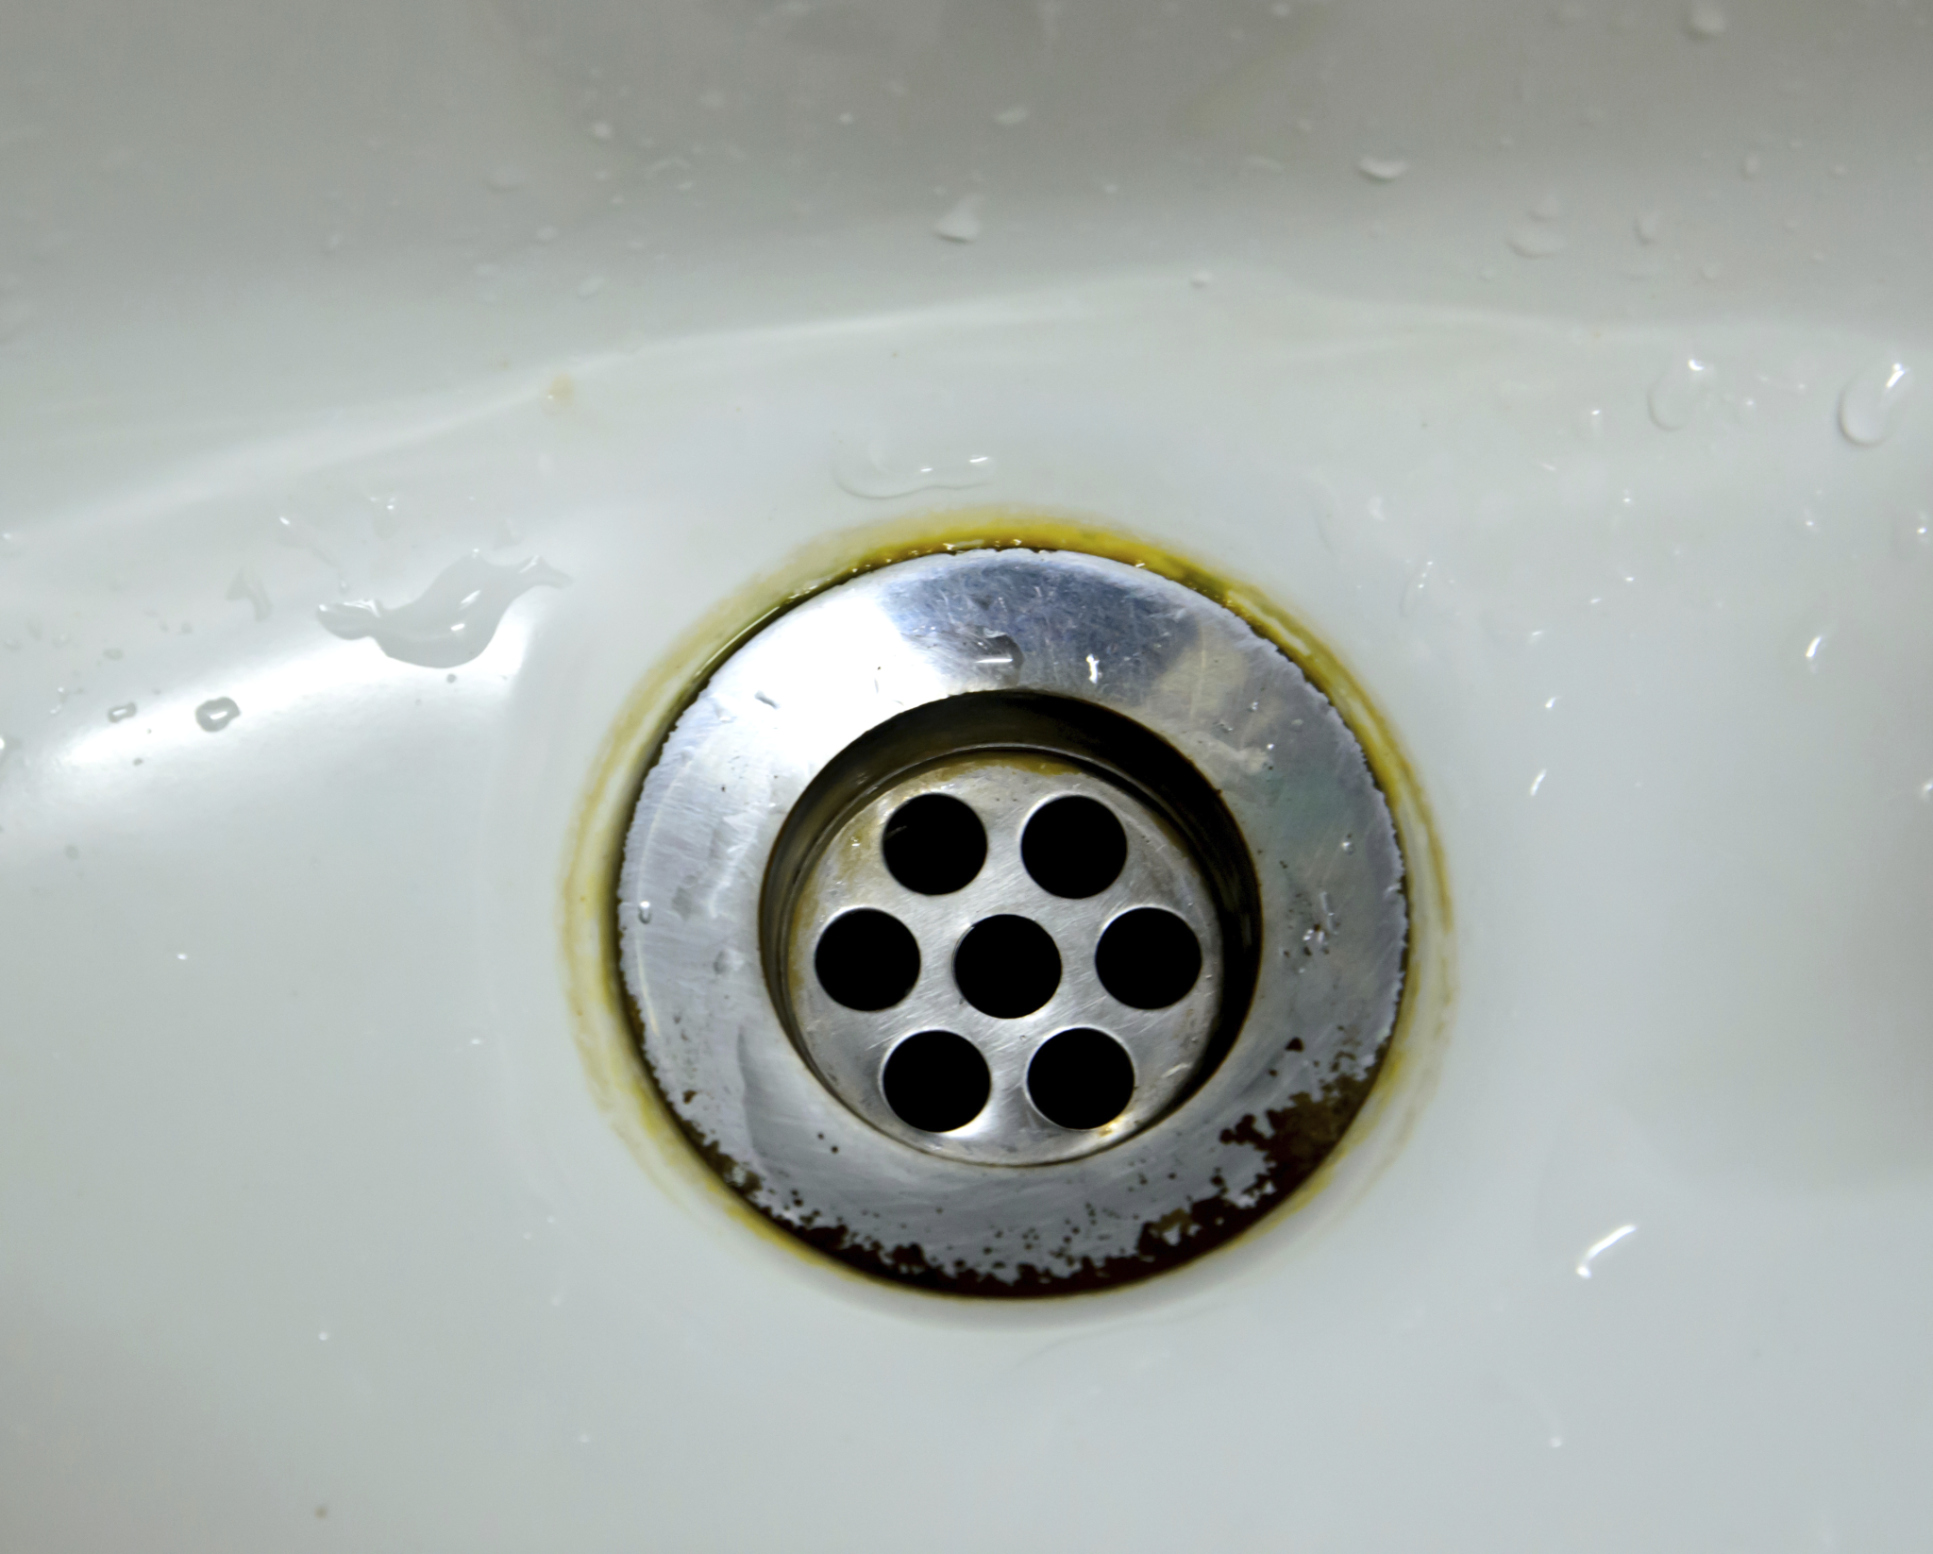 How to Clean Your Sink Drains Properly - Cummings Plumbing